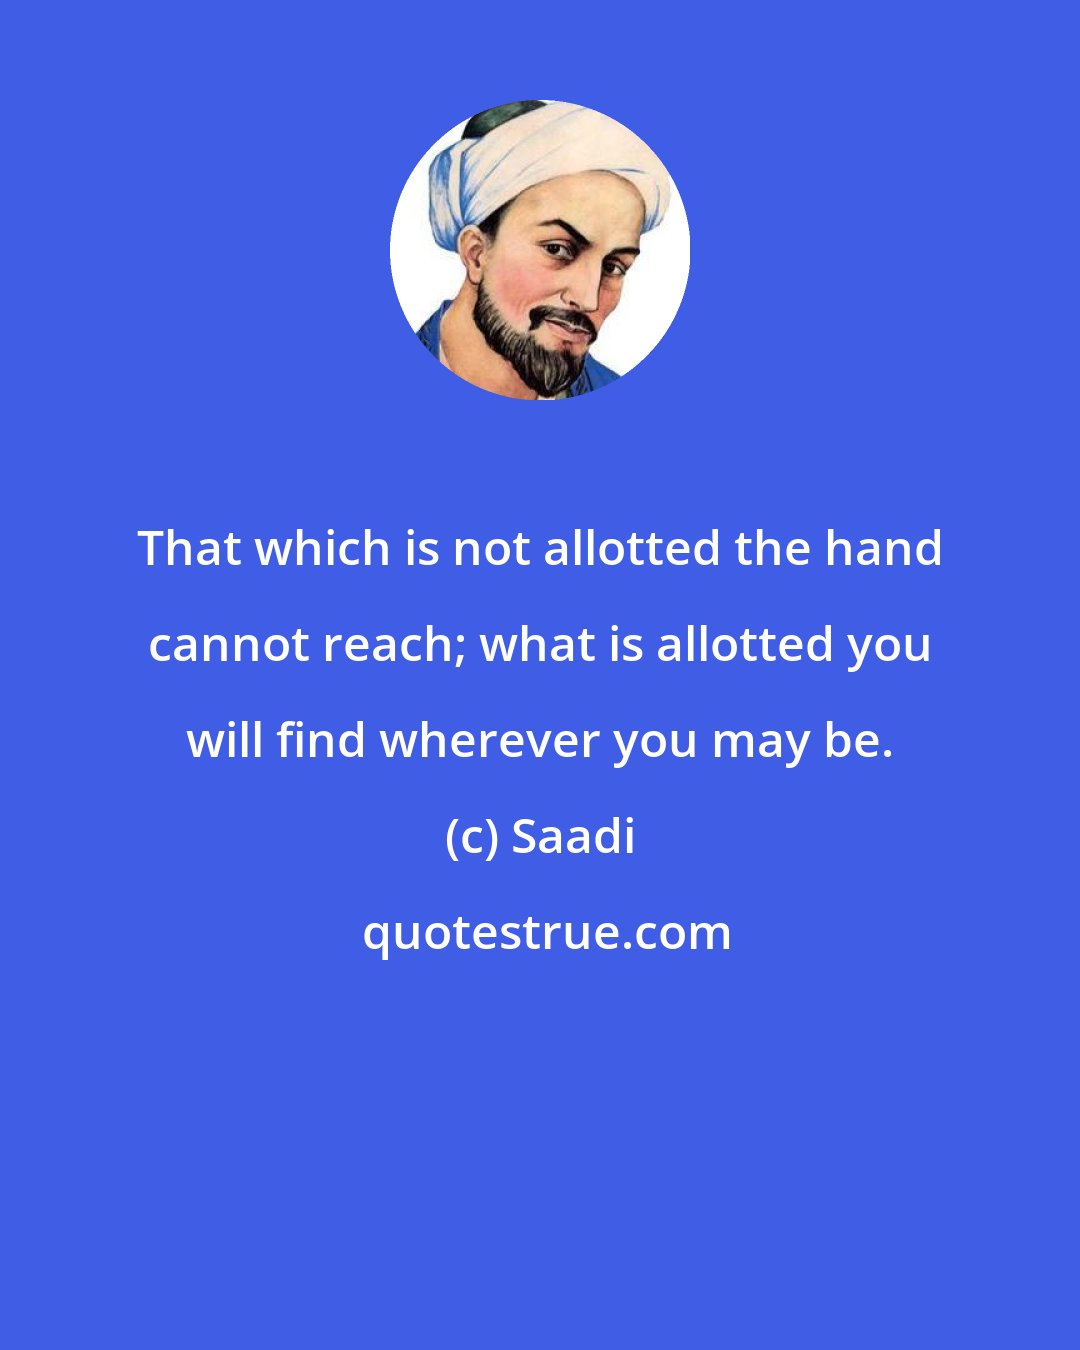 Saadi: That which is not allotted the hand cannot reach; what is allotted you will find wherever you may be.